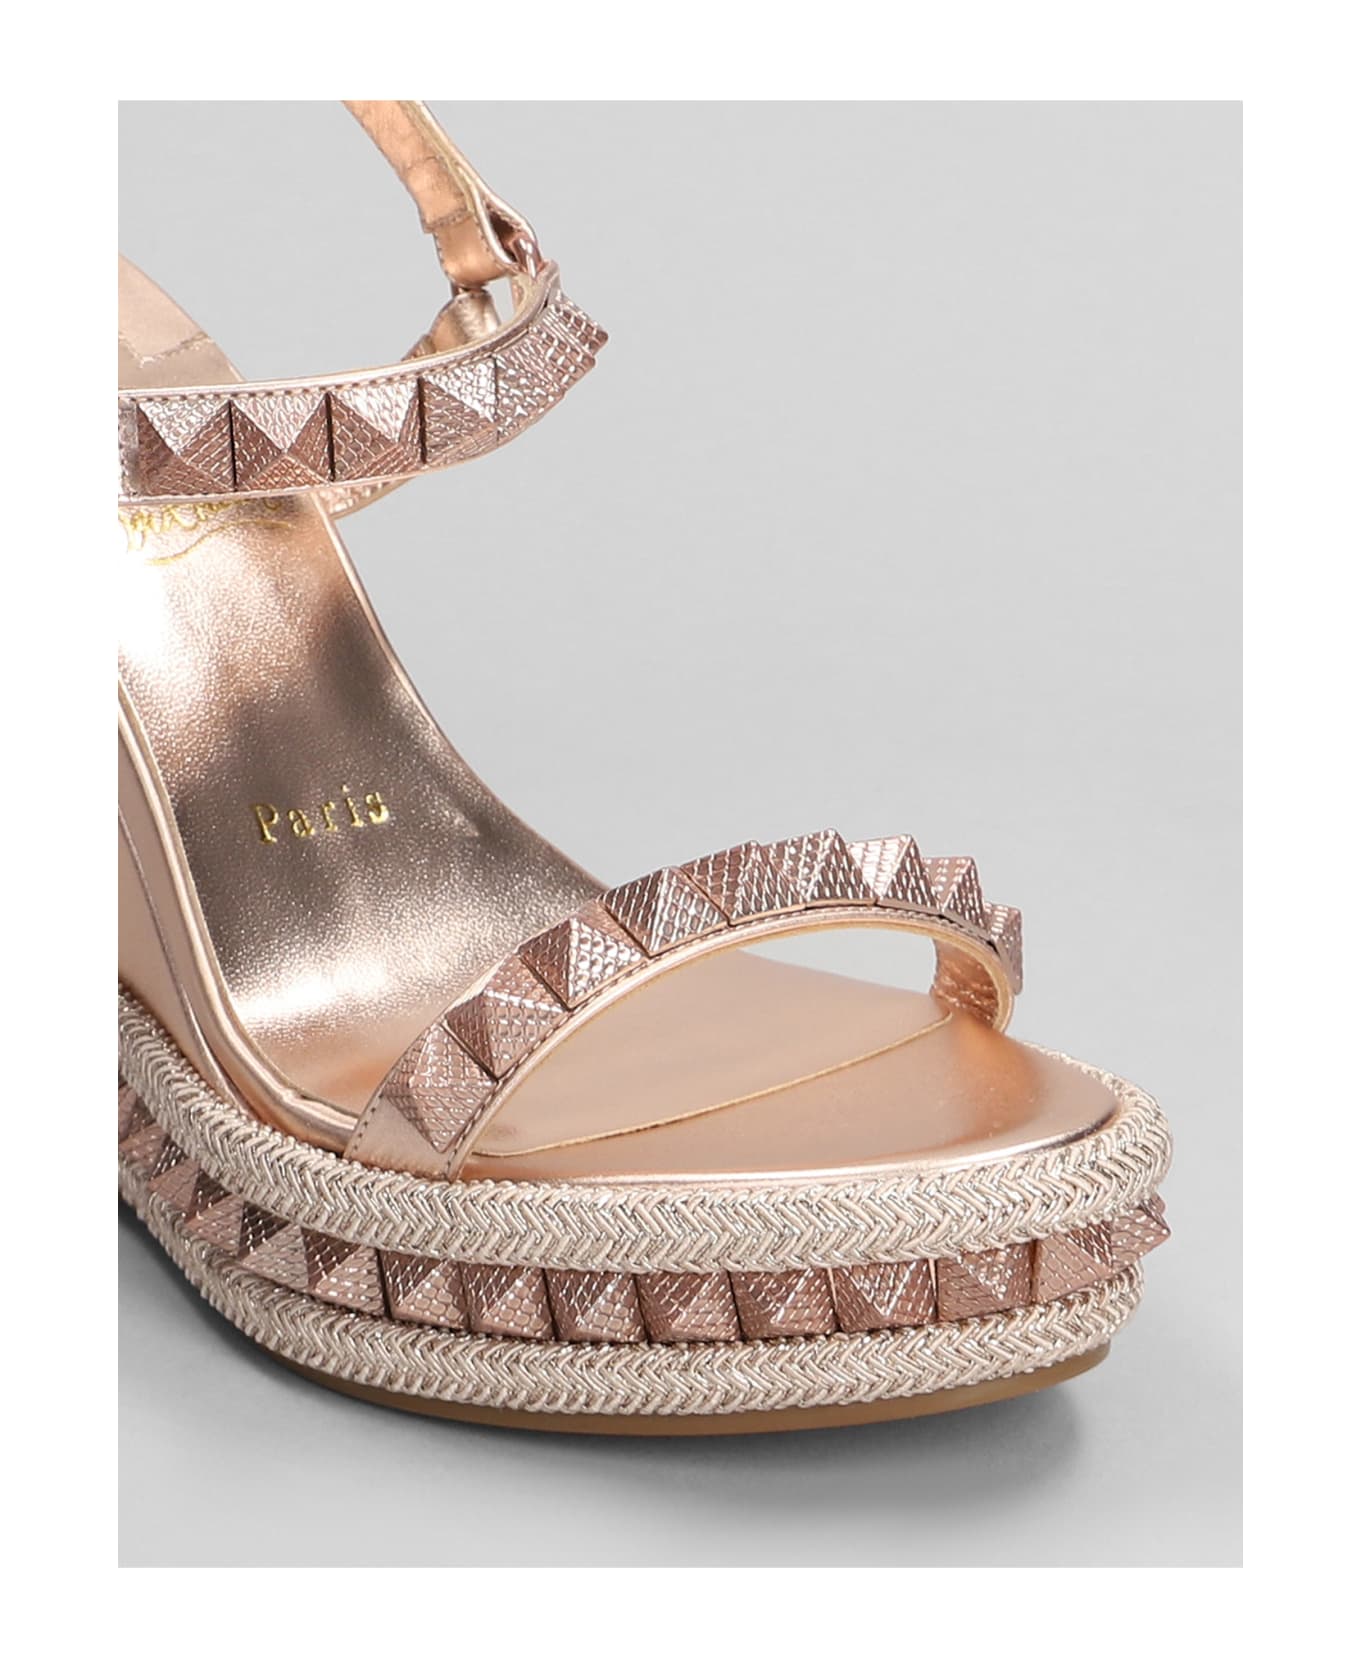 Christian Louboutin Pyraclou 110 Sandals In Rose-pink Leather - rose-pink サンダル